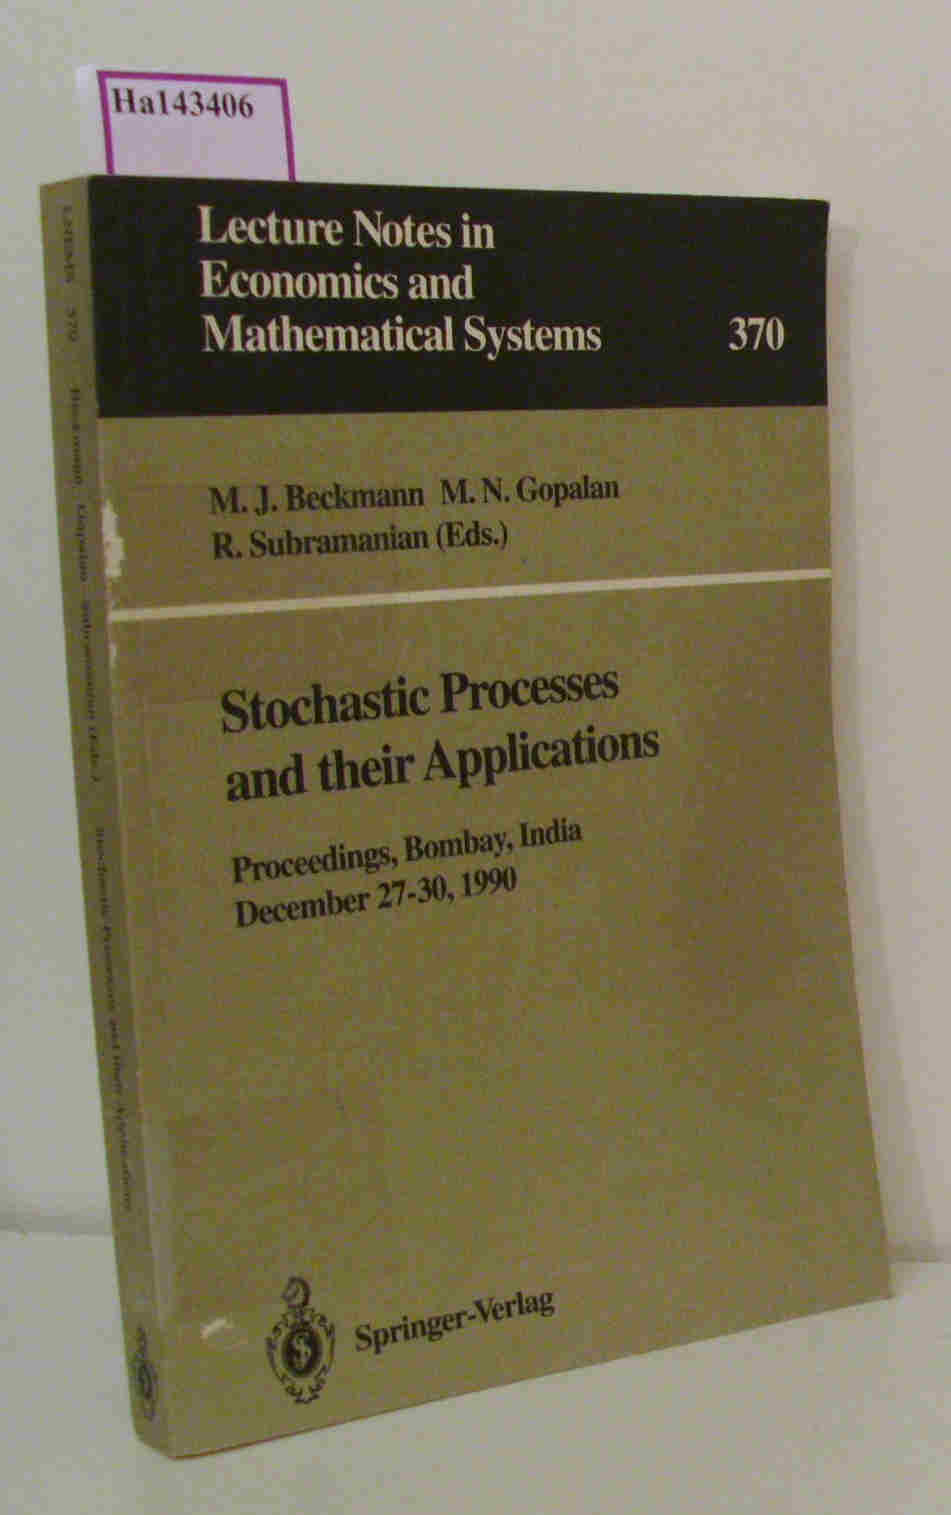 Stochastic Processes and their Applications. Proceedings of the Symposium held in honour of Professor S. K. Srinivasan at the Indian Institute of Technology Bombay, India, December 27-30, 1990. (= Lecture Notes in Economics and Mathe.l Systems, 370) . - Beckmann,  M. J. / Gopalan, M. N. / Subramanian, R. ( Ed. )